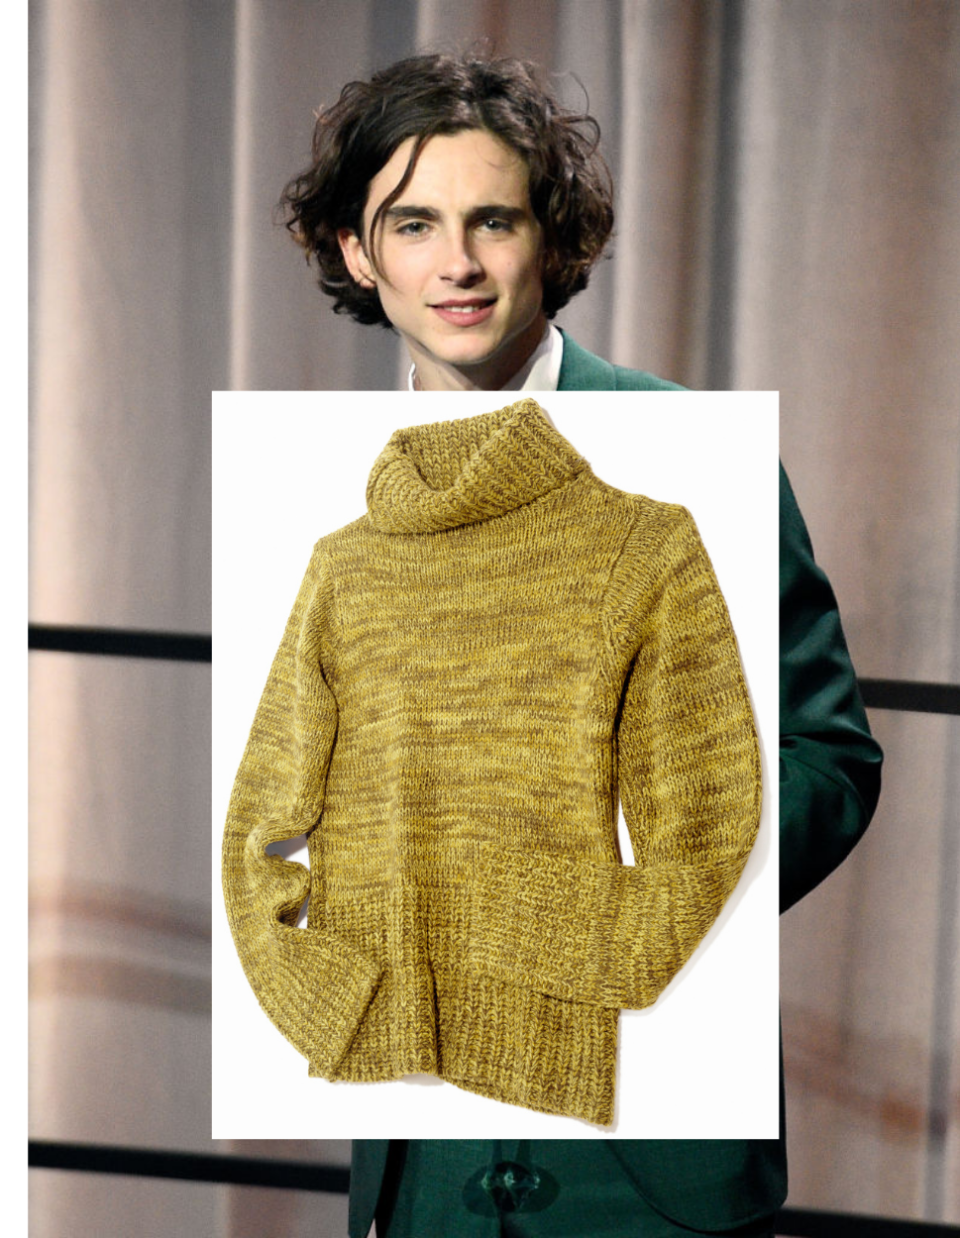 A photo of Timmy's head above a chartreuse turtleneck sweater